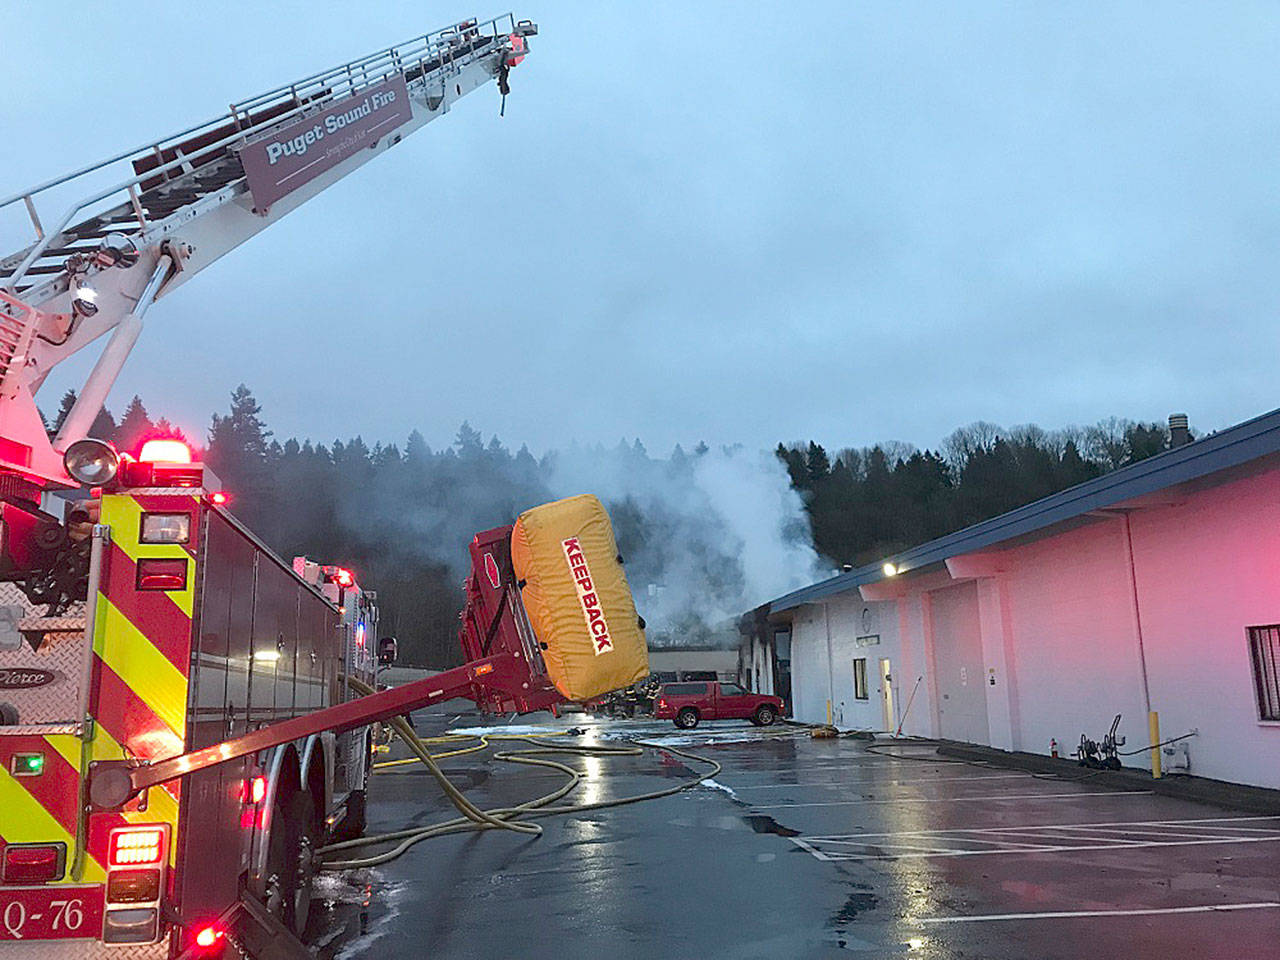 Firefighters battle a commercial blaze Monday morning in the 22600 block of 88th Avenue South in Kent. COURTESY PHOTO, Puget Sound Fire